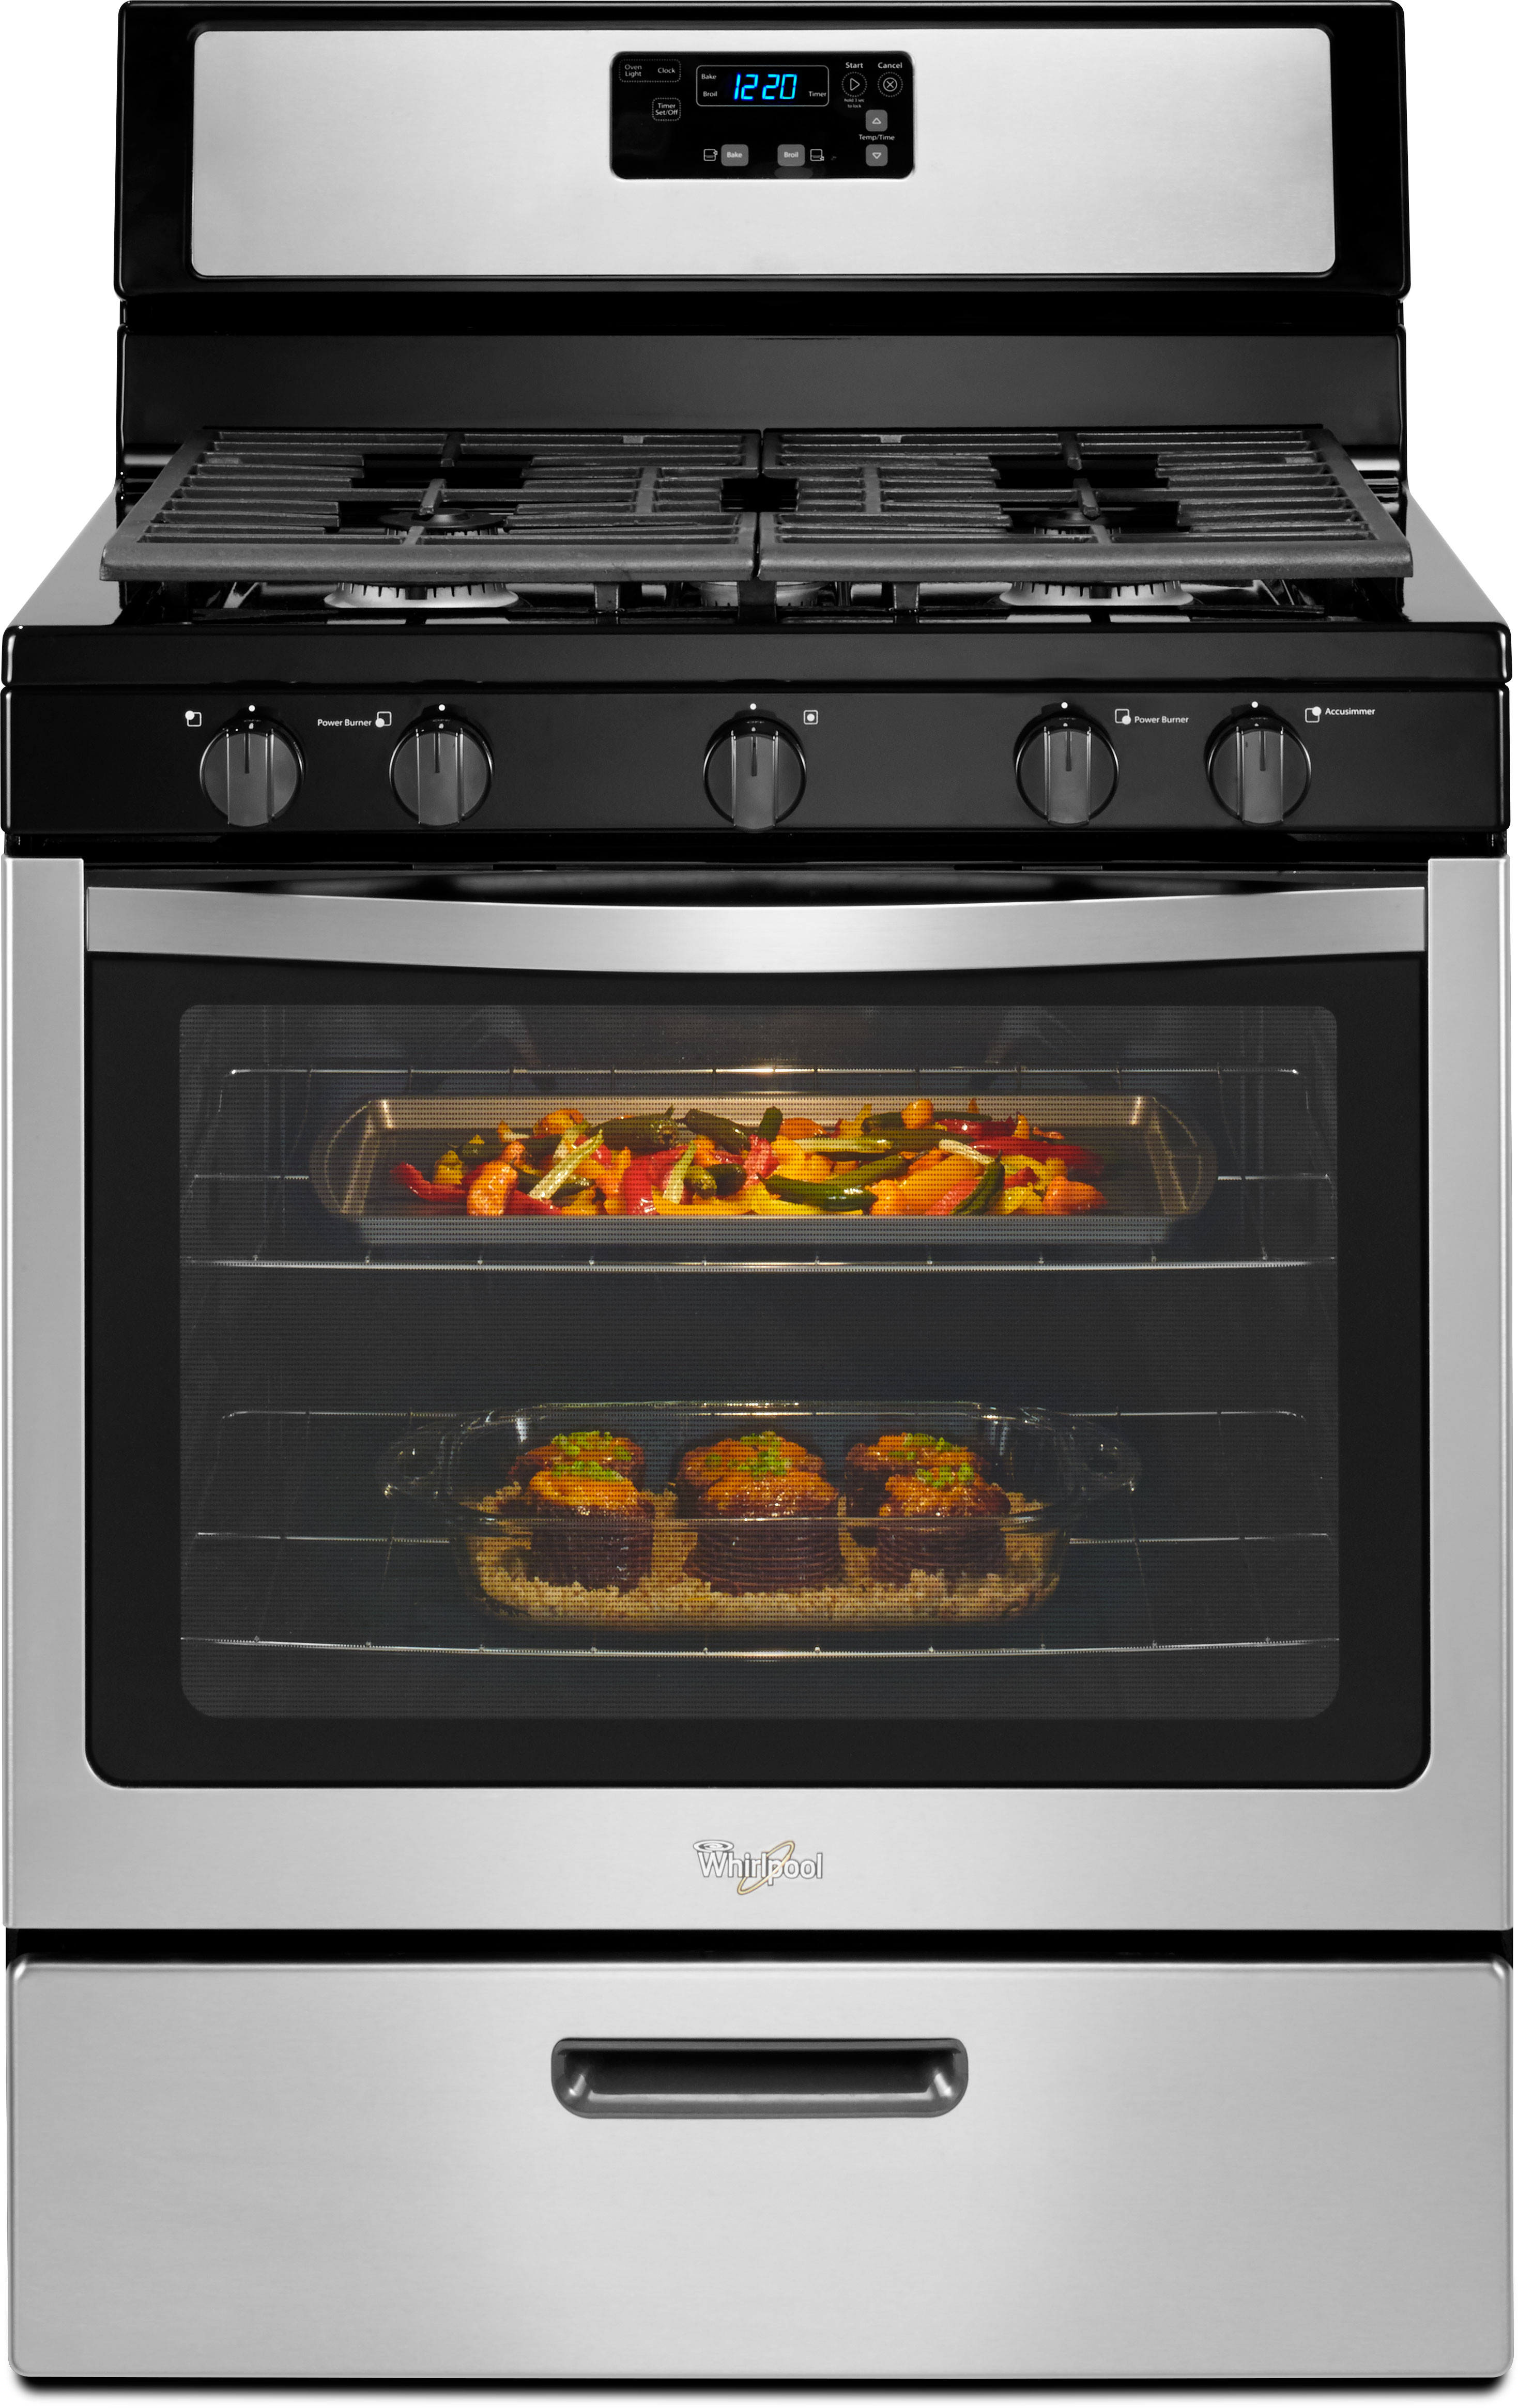 Whirlpool Gold Stainless Steel Stove / Whirlpool WFG505M0BS 30 Inch Freestanding Gas Range with 